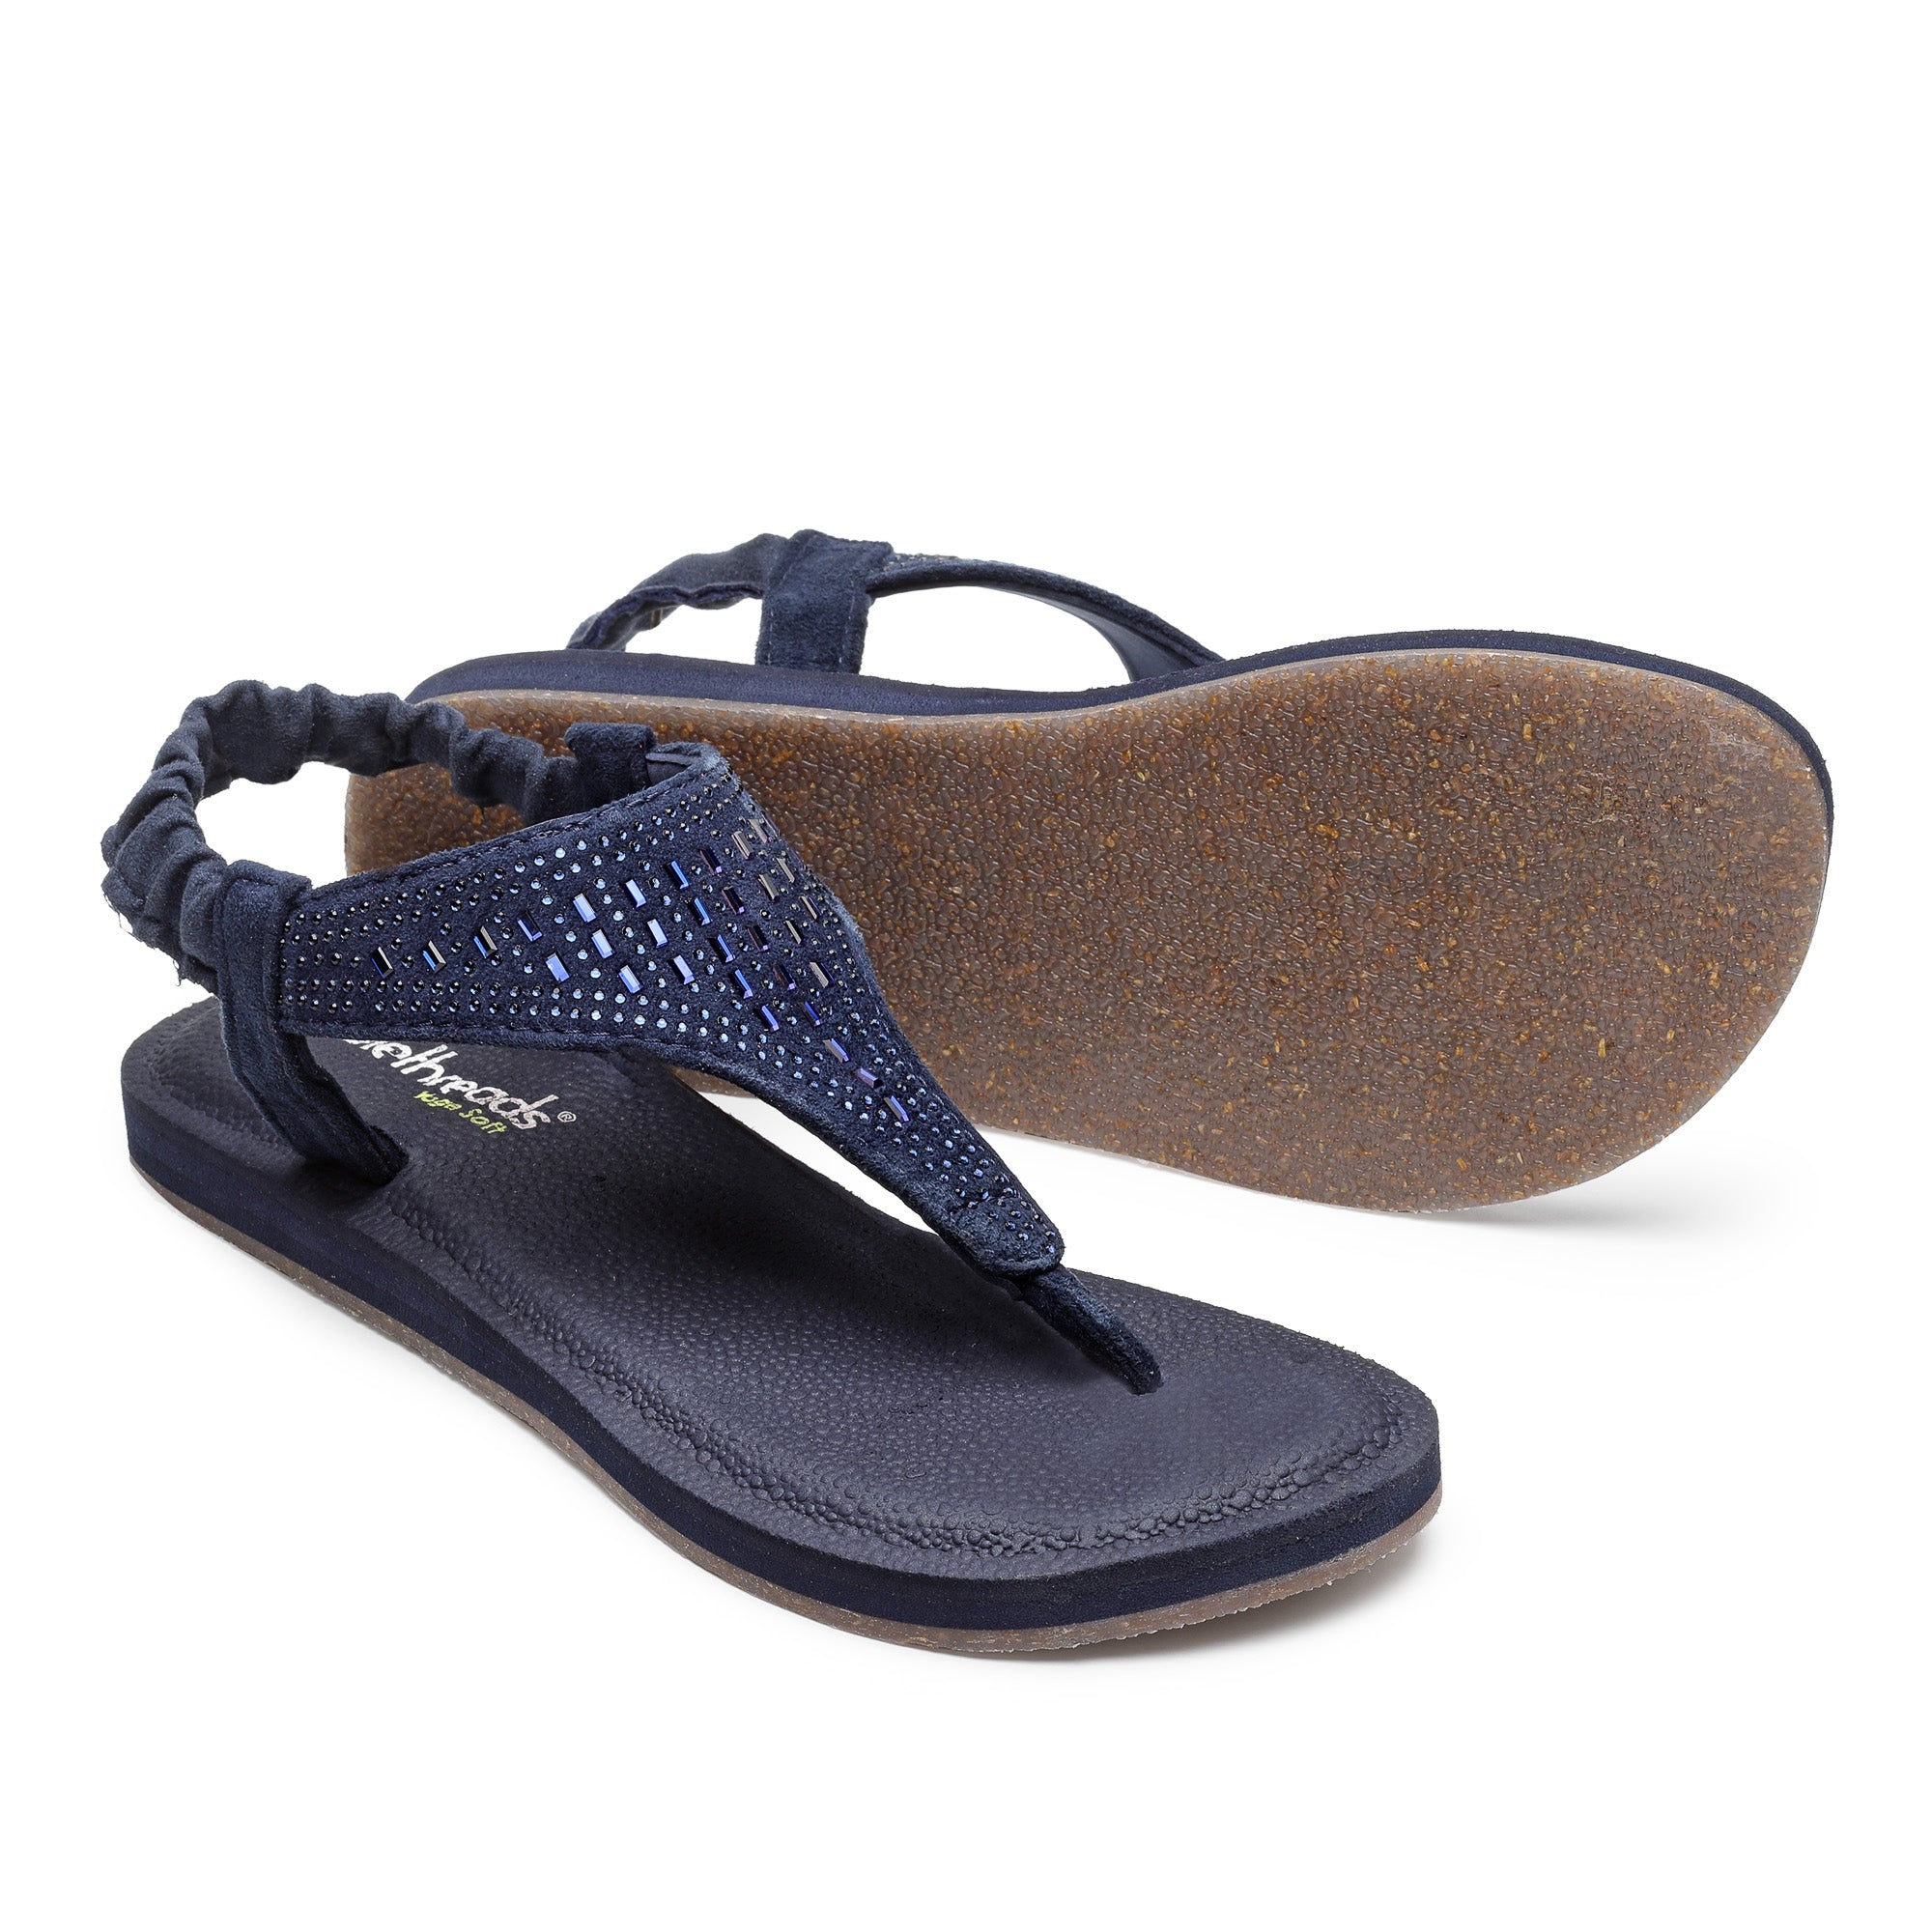 Sandals for Women | Yoga for your feet